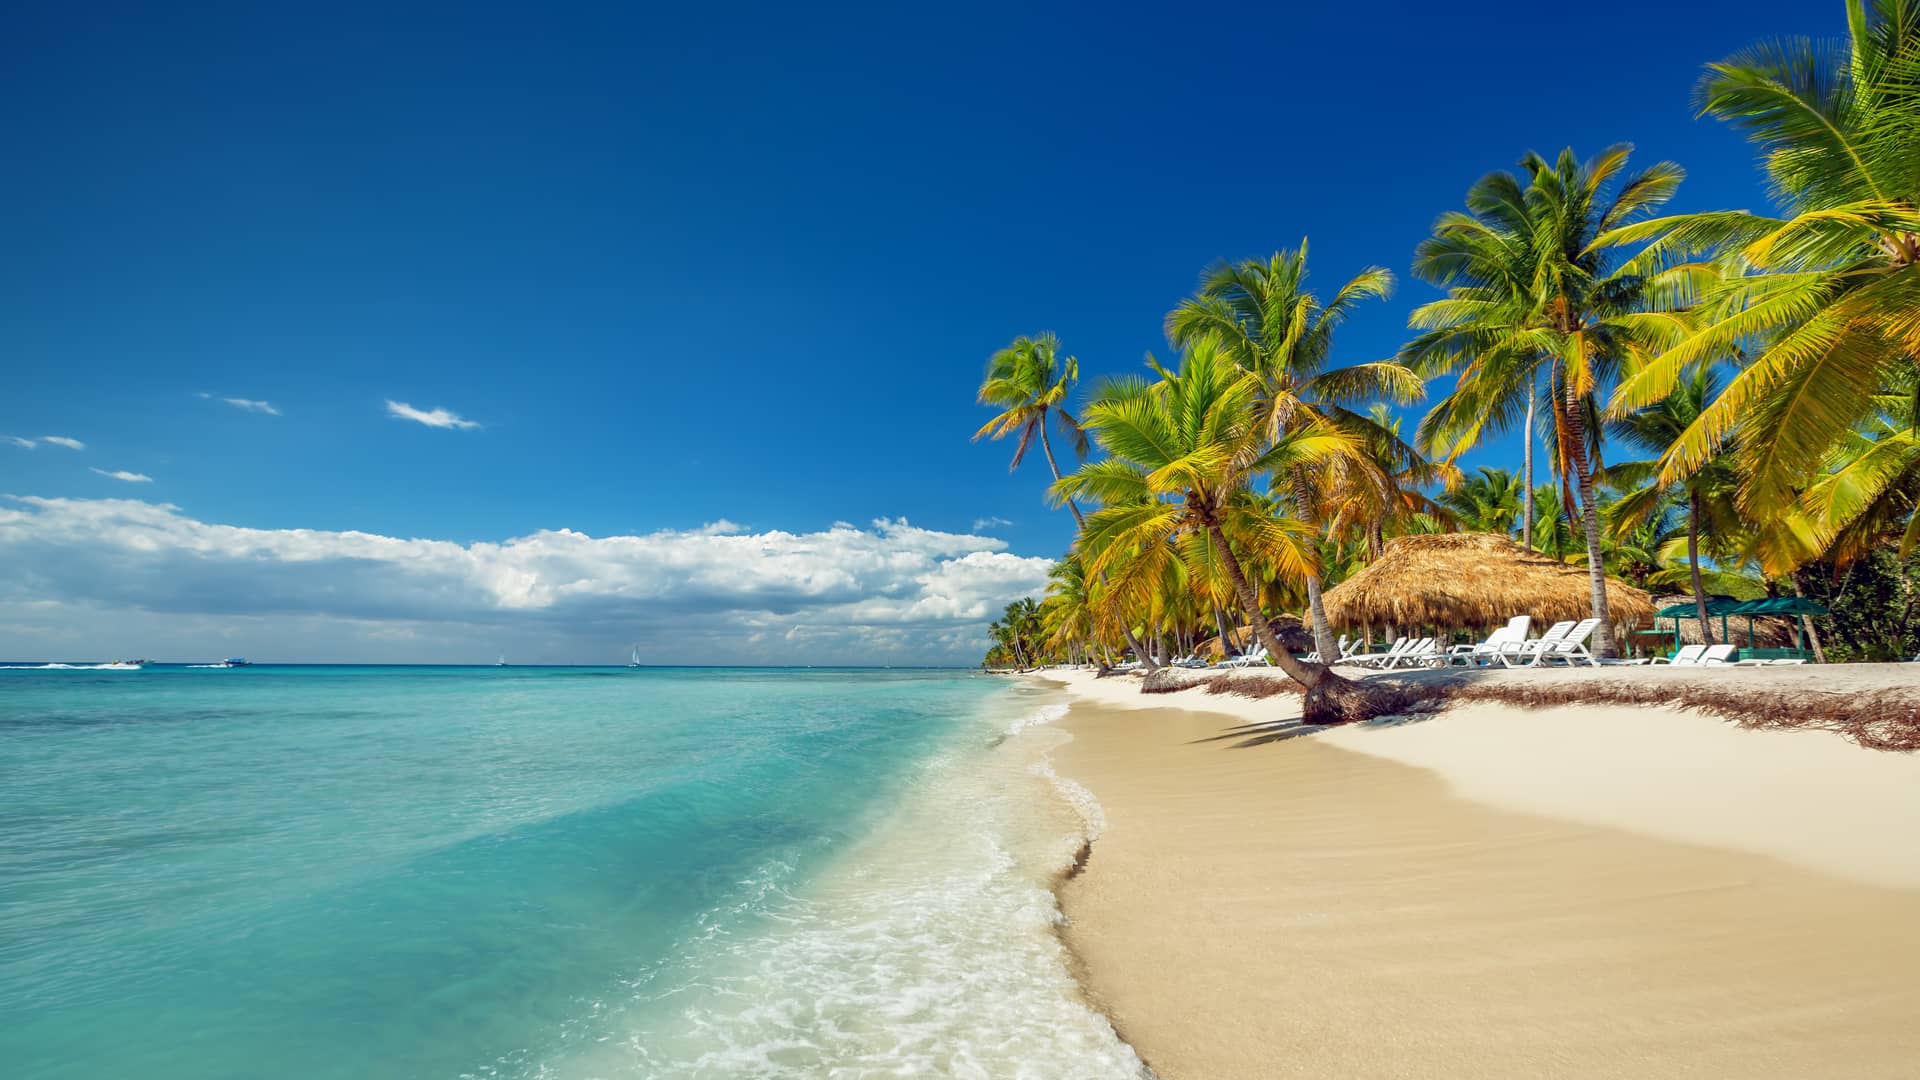 A heavenly beach in Punta Cana that represents the international deals in this place